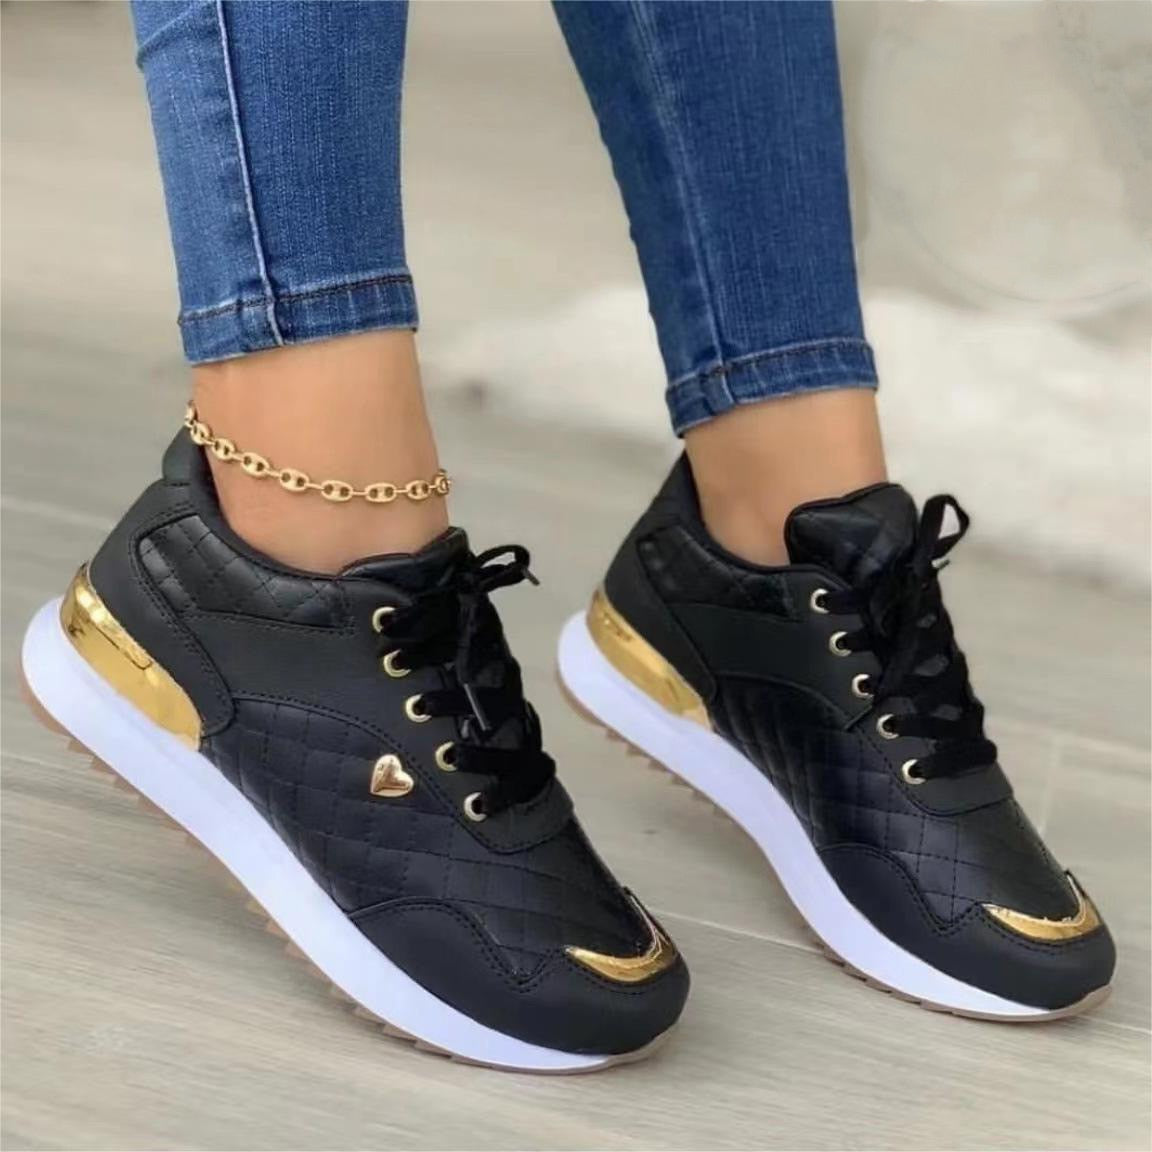 New Spring Autumn Women Shoes Round Toe Platform Low Heel Colorblocking Females Sneakers Fashion Elegant Outer Leisure Shoes